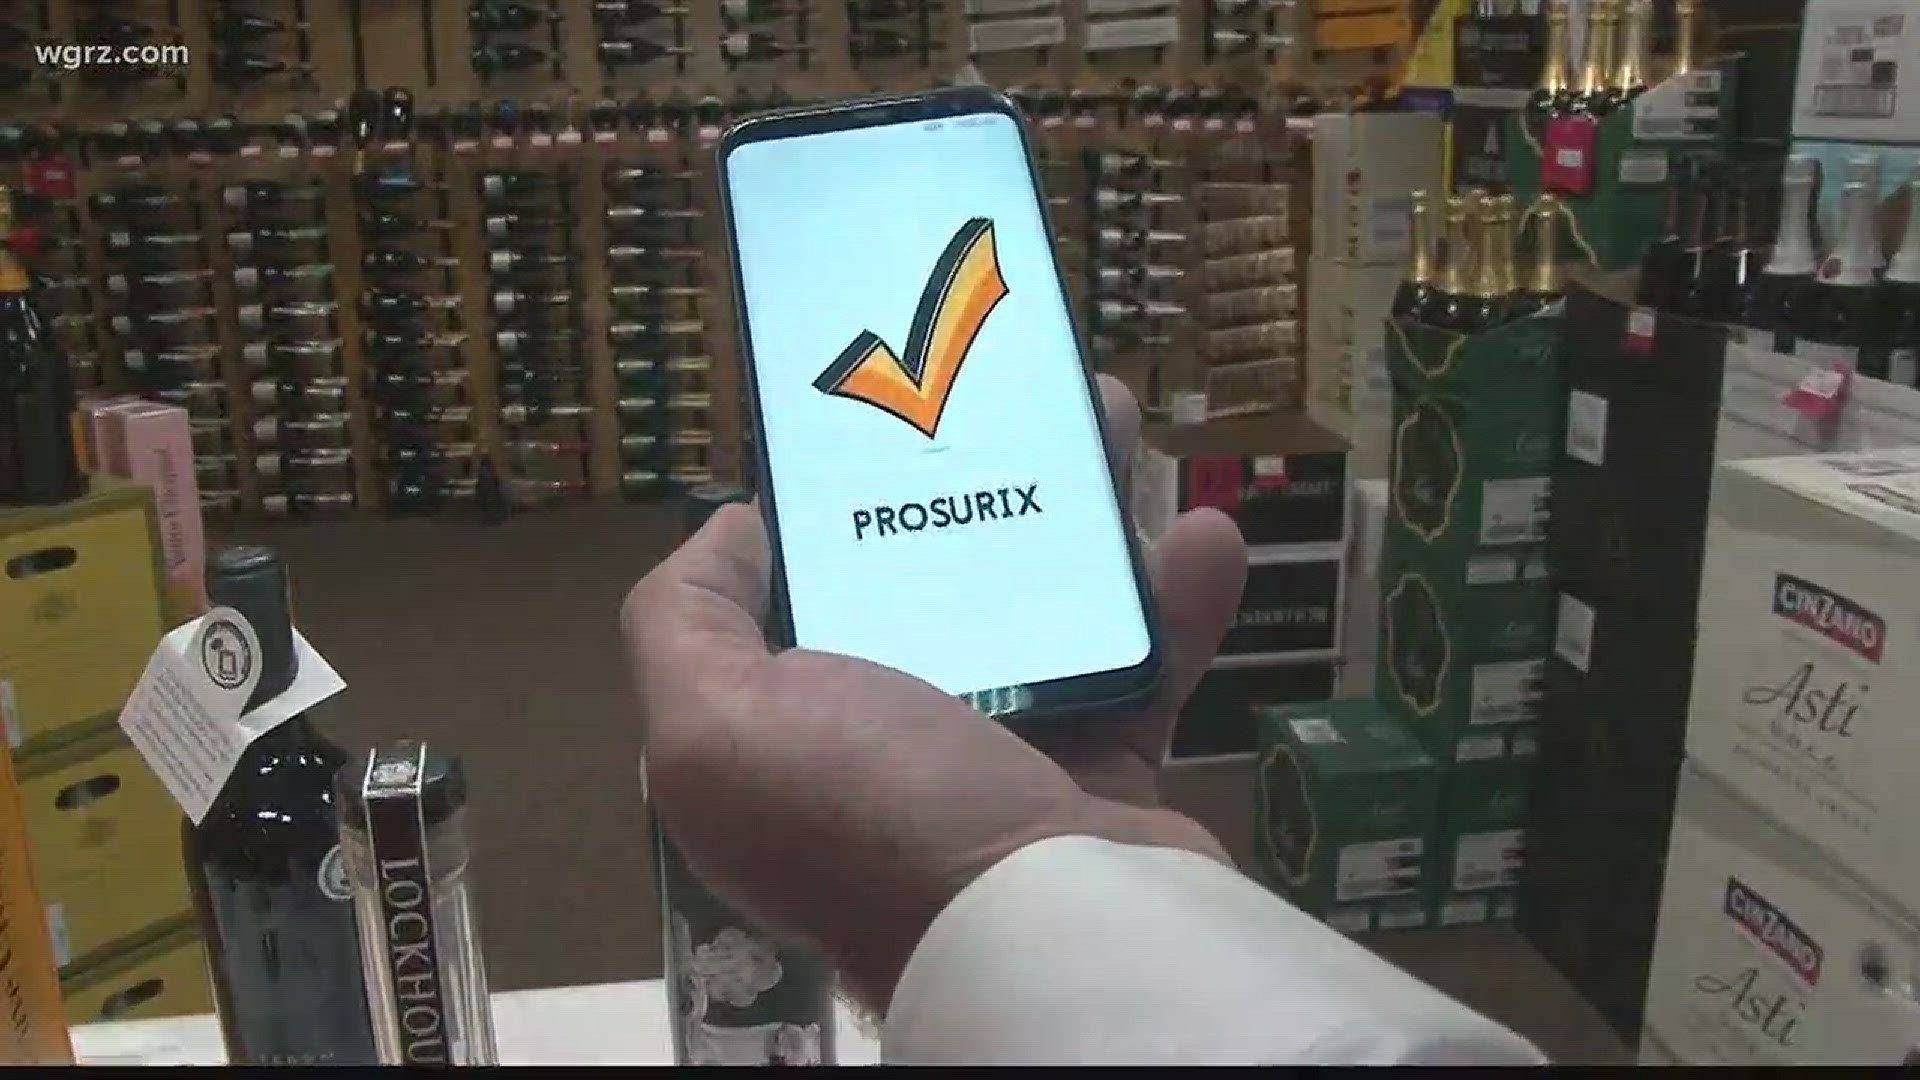 When you pop open a bottle of alcohol, you probably trust that it is what the label says it is. But some say counterfeiting booze is becoming more popular. Daybreak's Stephanie Barnes shows us how a new locally-created app can verify the alcohol you buy